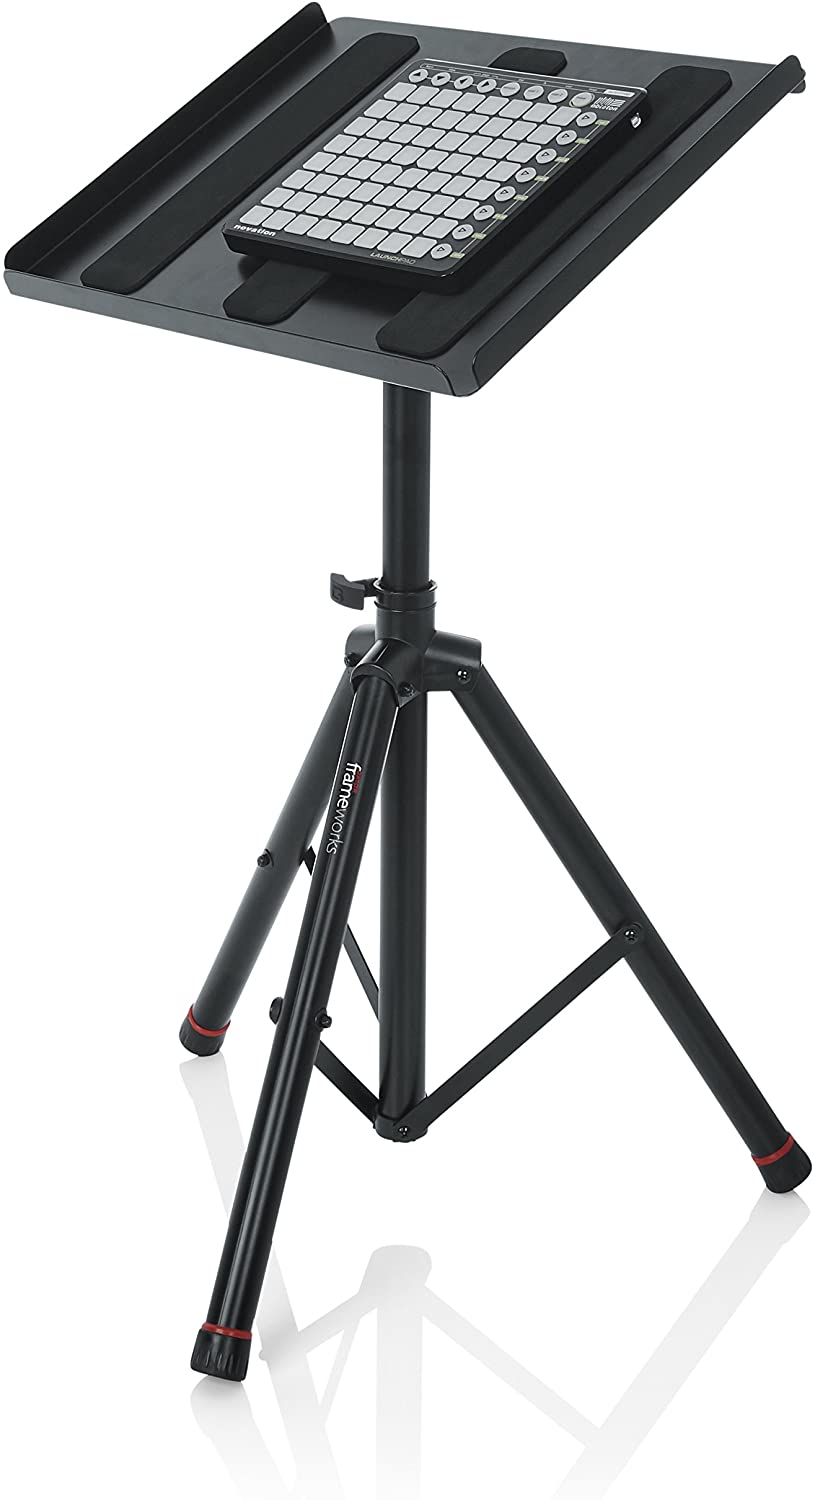 Gator Frameworks Heavy Duty Deluxe Adjustable Multi-Media Gear Stand Featuring 100x100 Vesa Mounting Brackets | Ideal for Laptops and more - GFW-UTL-MEDIATRAY2 - Pro-Distributing